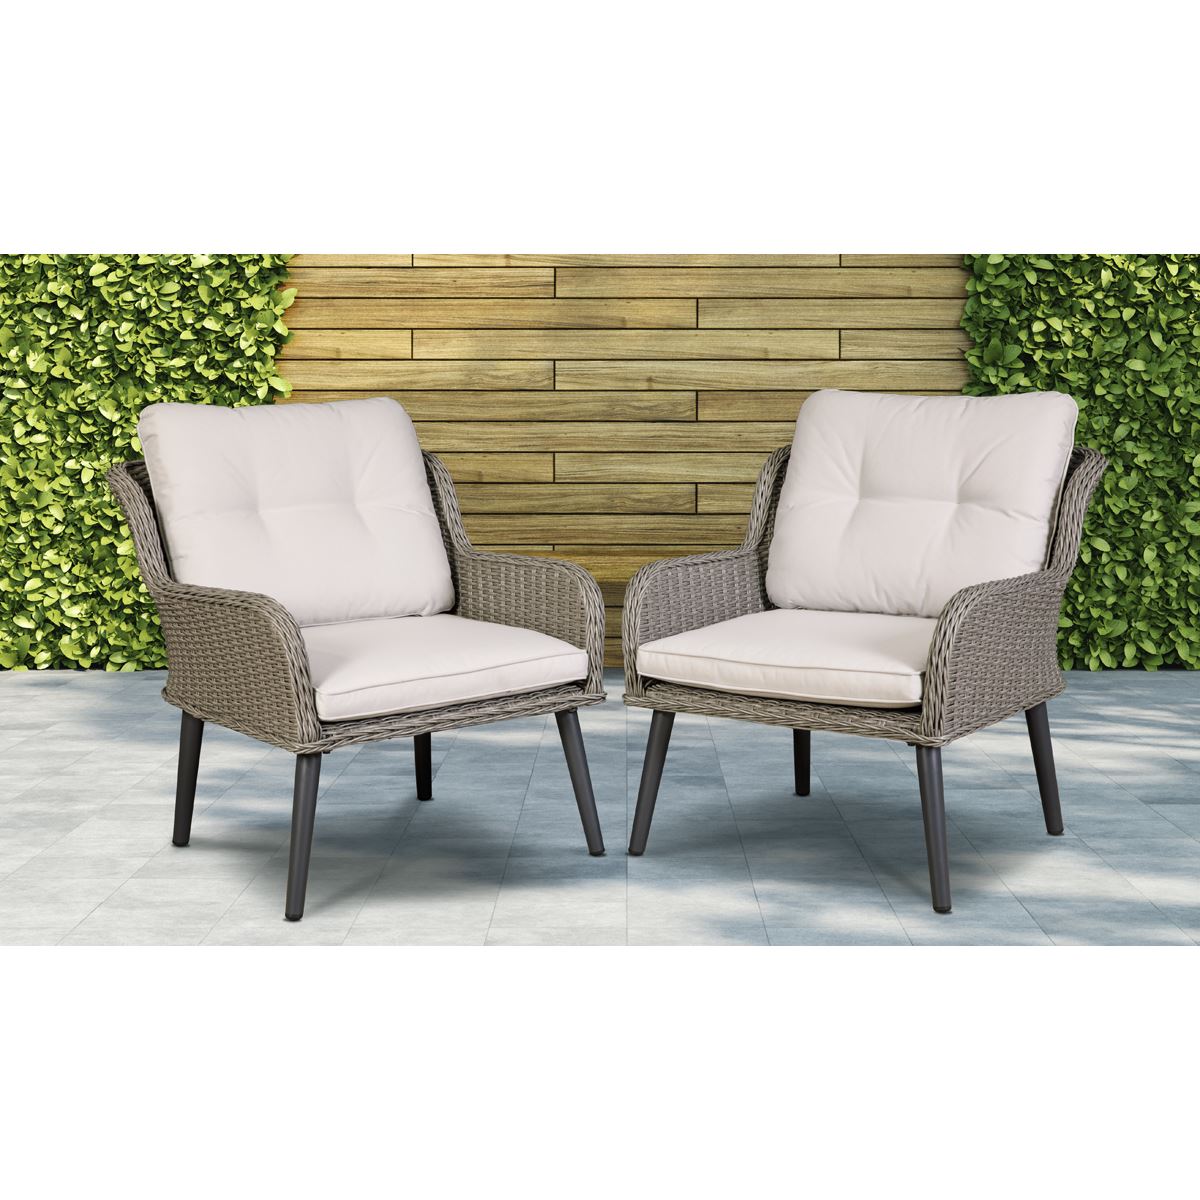 Dellonda Buxton Rattan Wicker Outdoor Lounge Chairs with Cushion, Grey